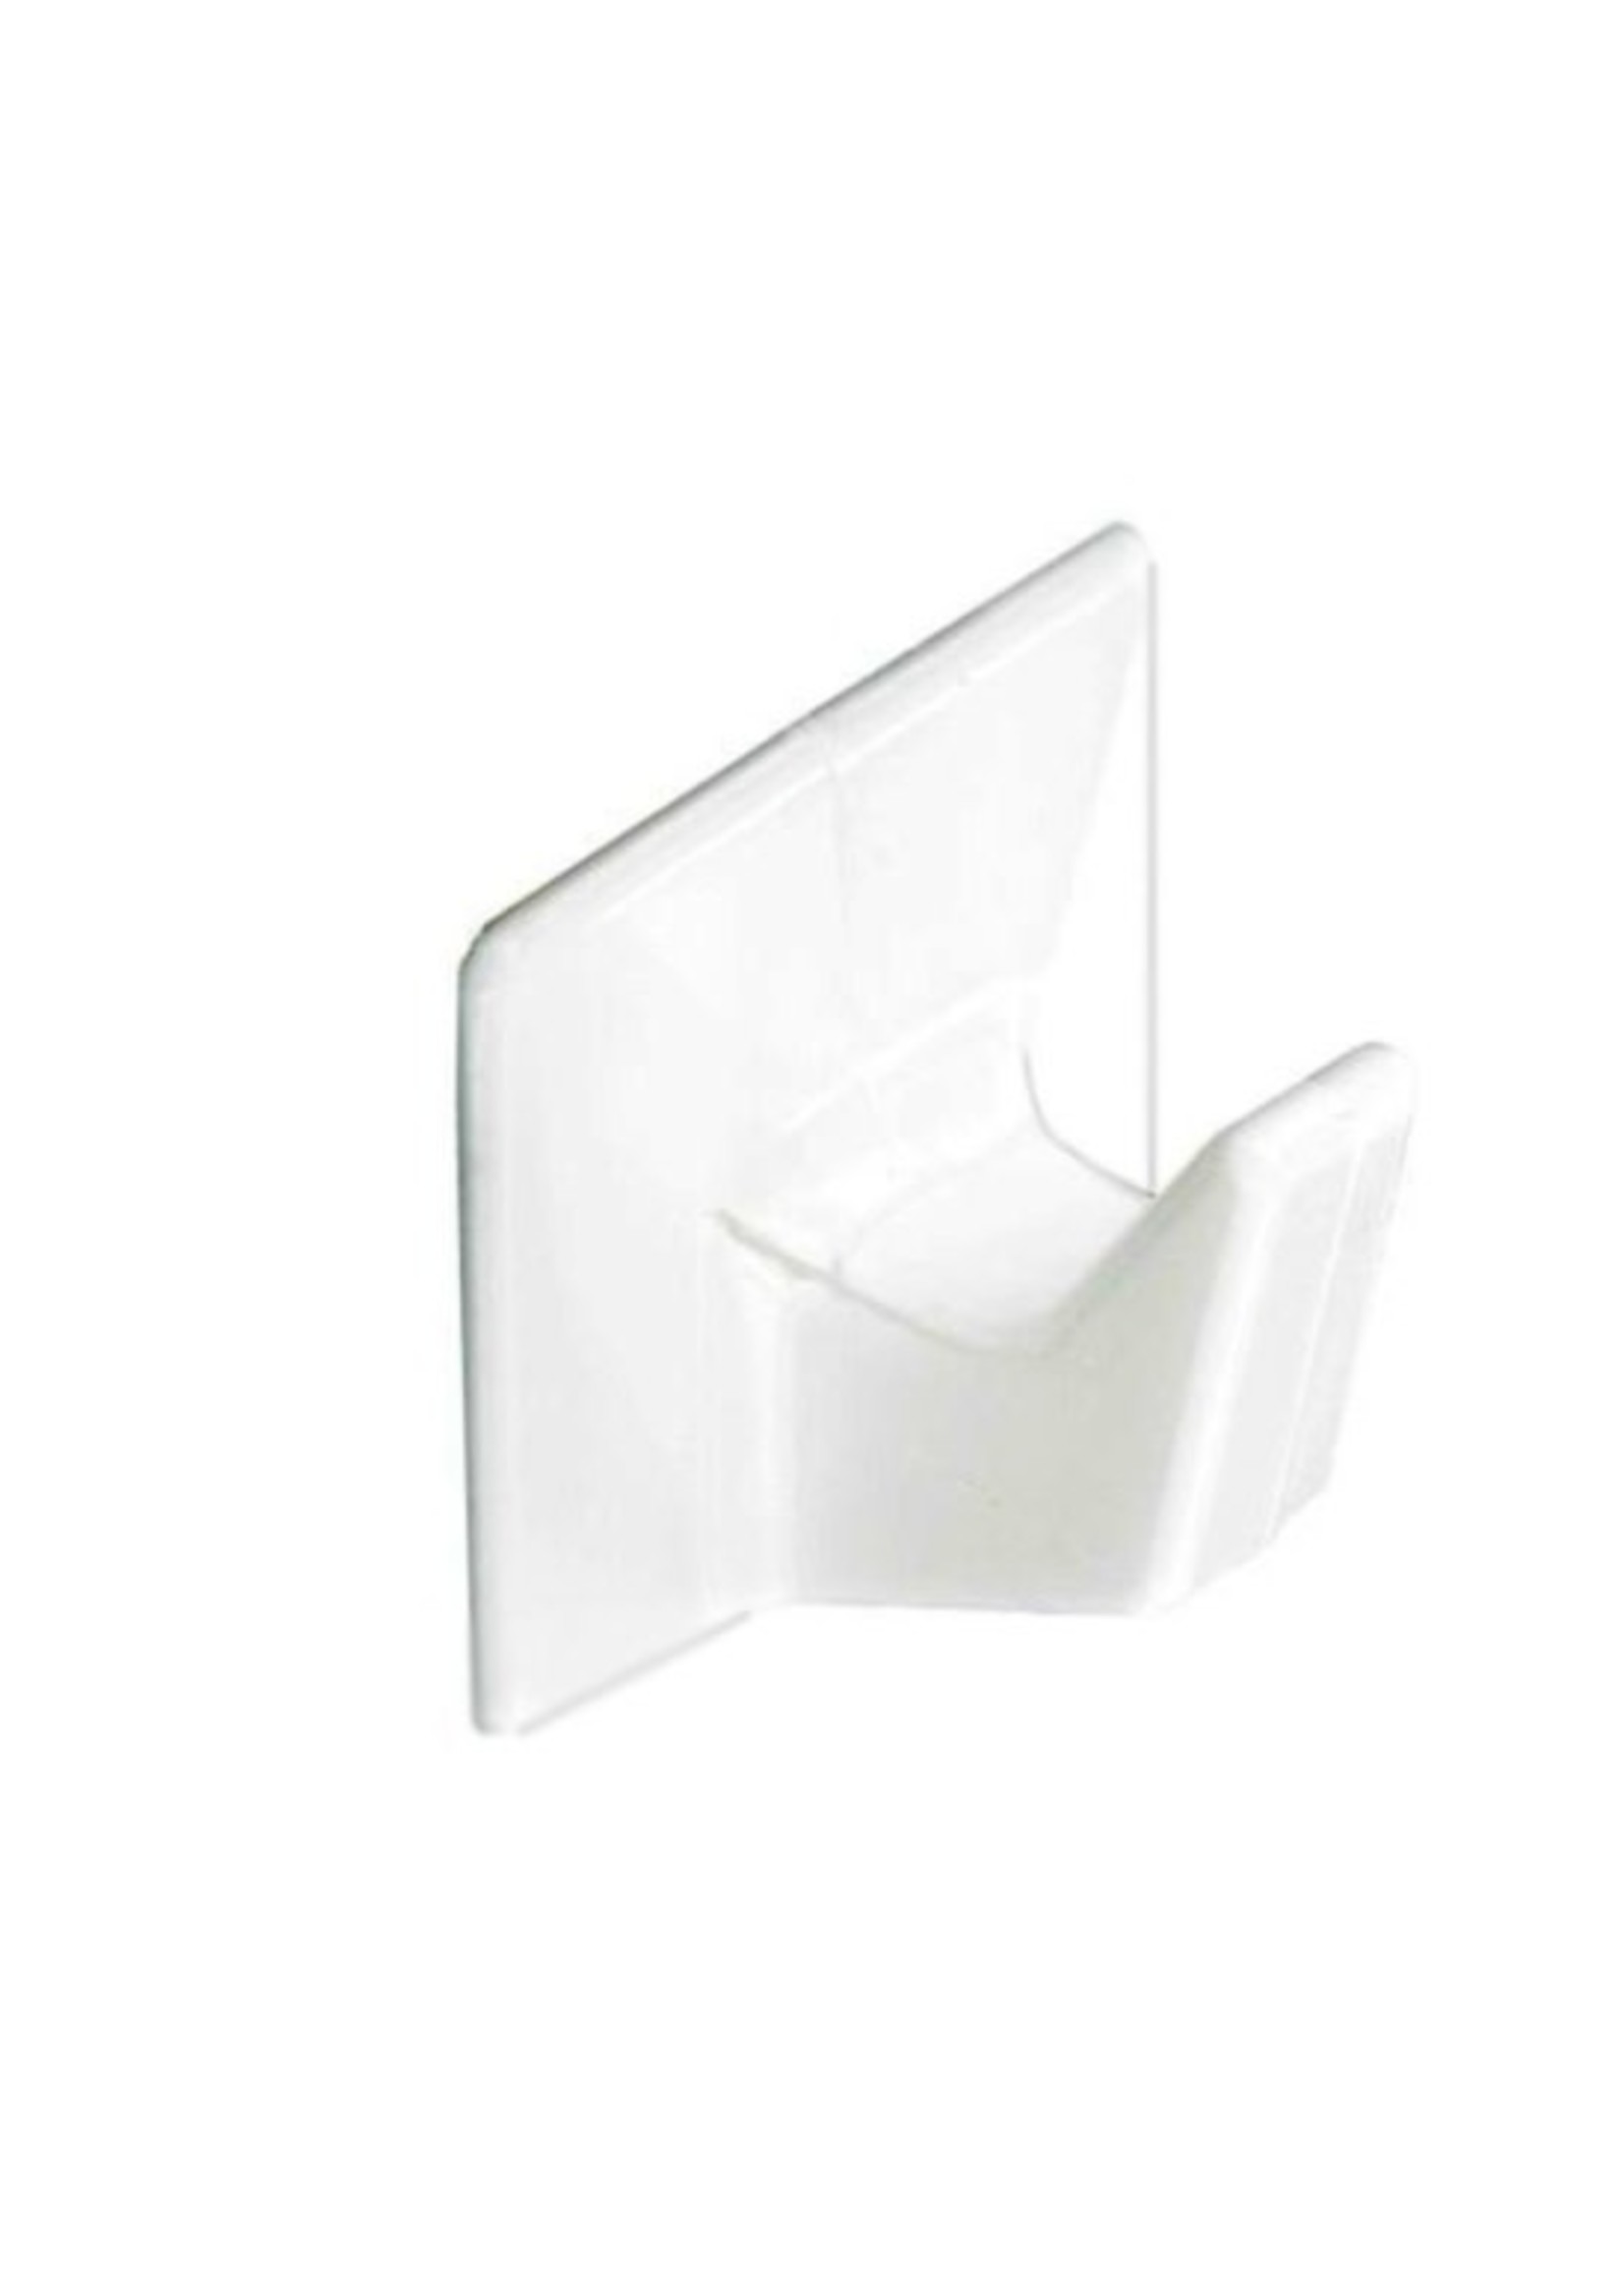 Securit Self-Adhesive Hooks Small White S6351